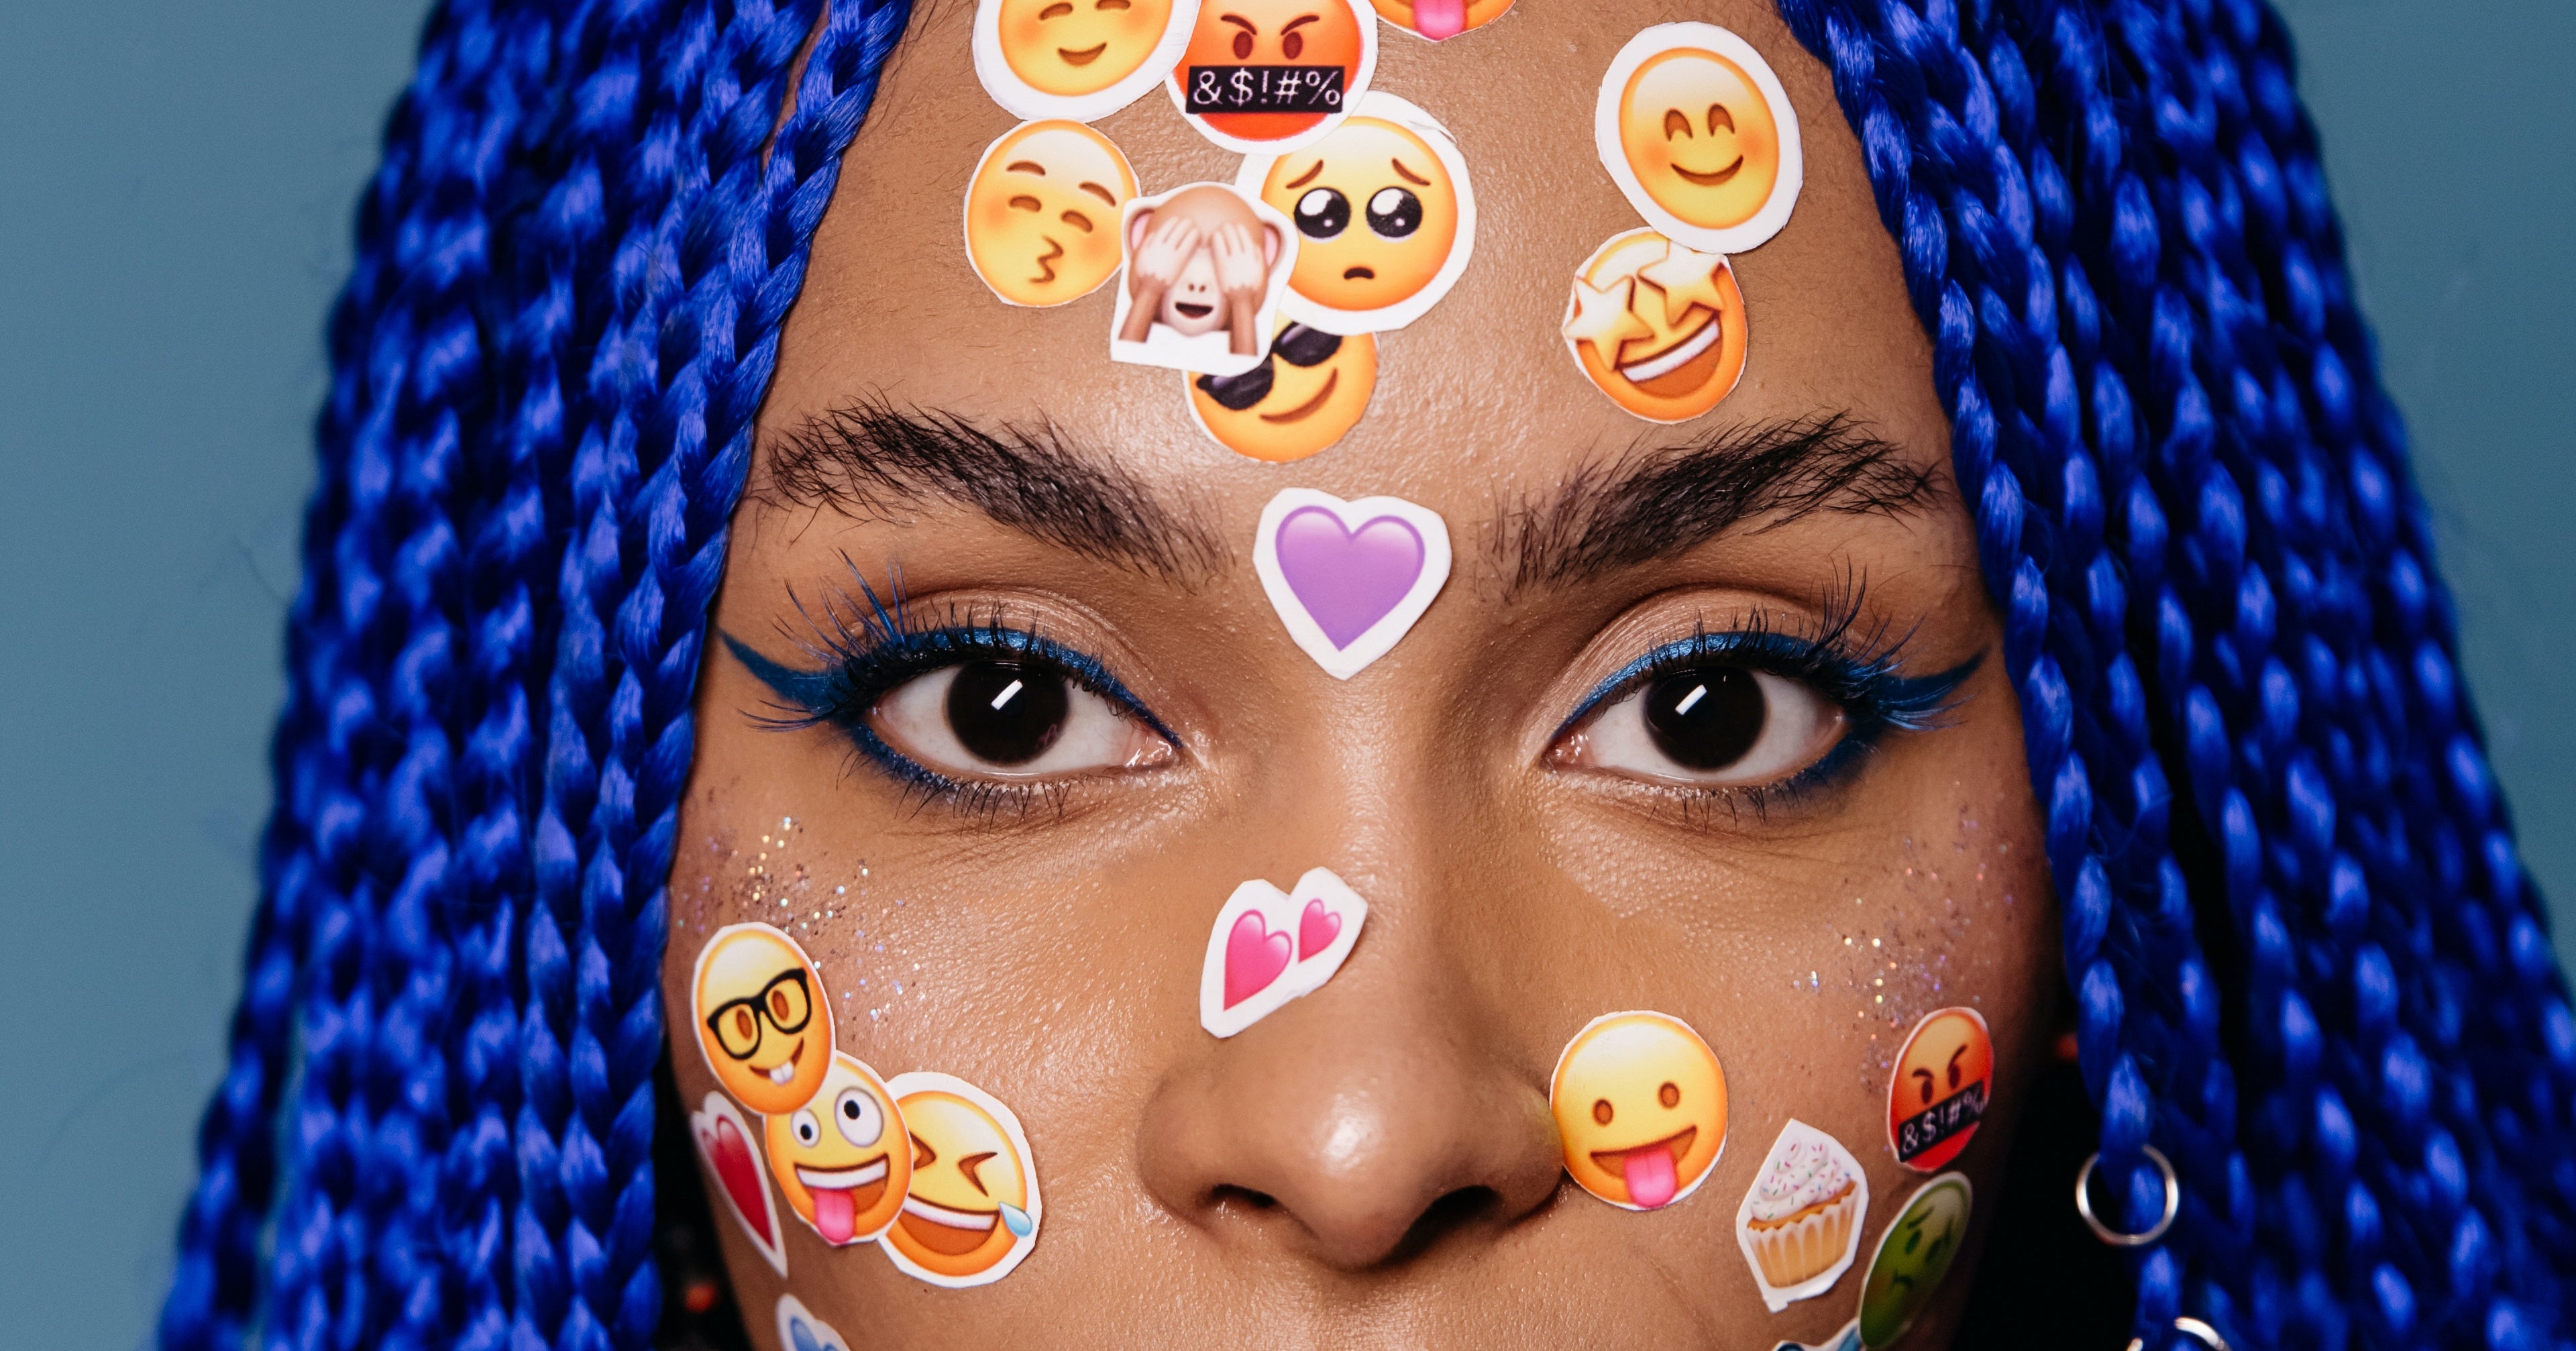 A woman's face positioned behind various Instagram stickers